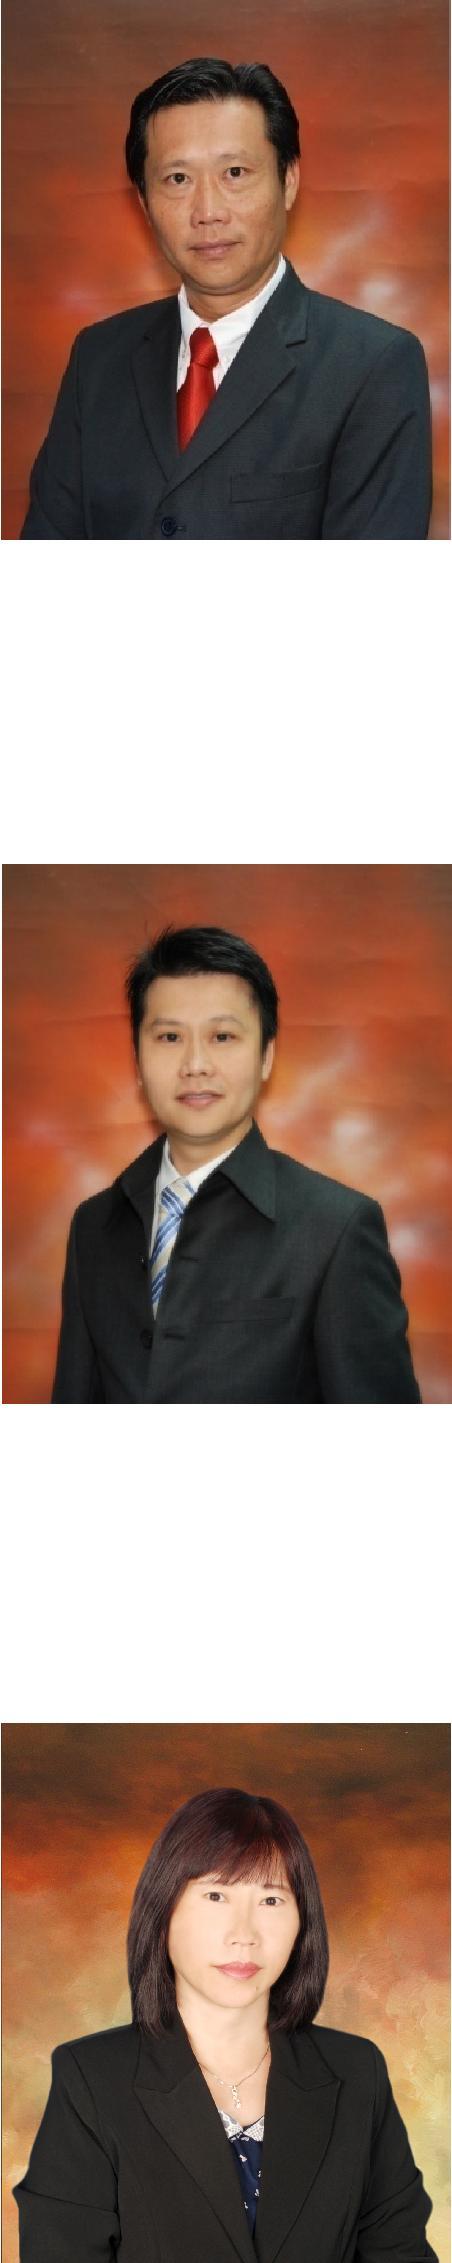 Profile of Directors Pang Chee Khiong Executive Chairman, Non-Independent Mr Pang Chee Khiong, a Malaysian aged 51 is a Non-Independent Executive Chairman since 25 March 2008.